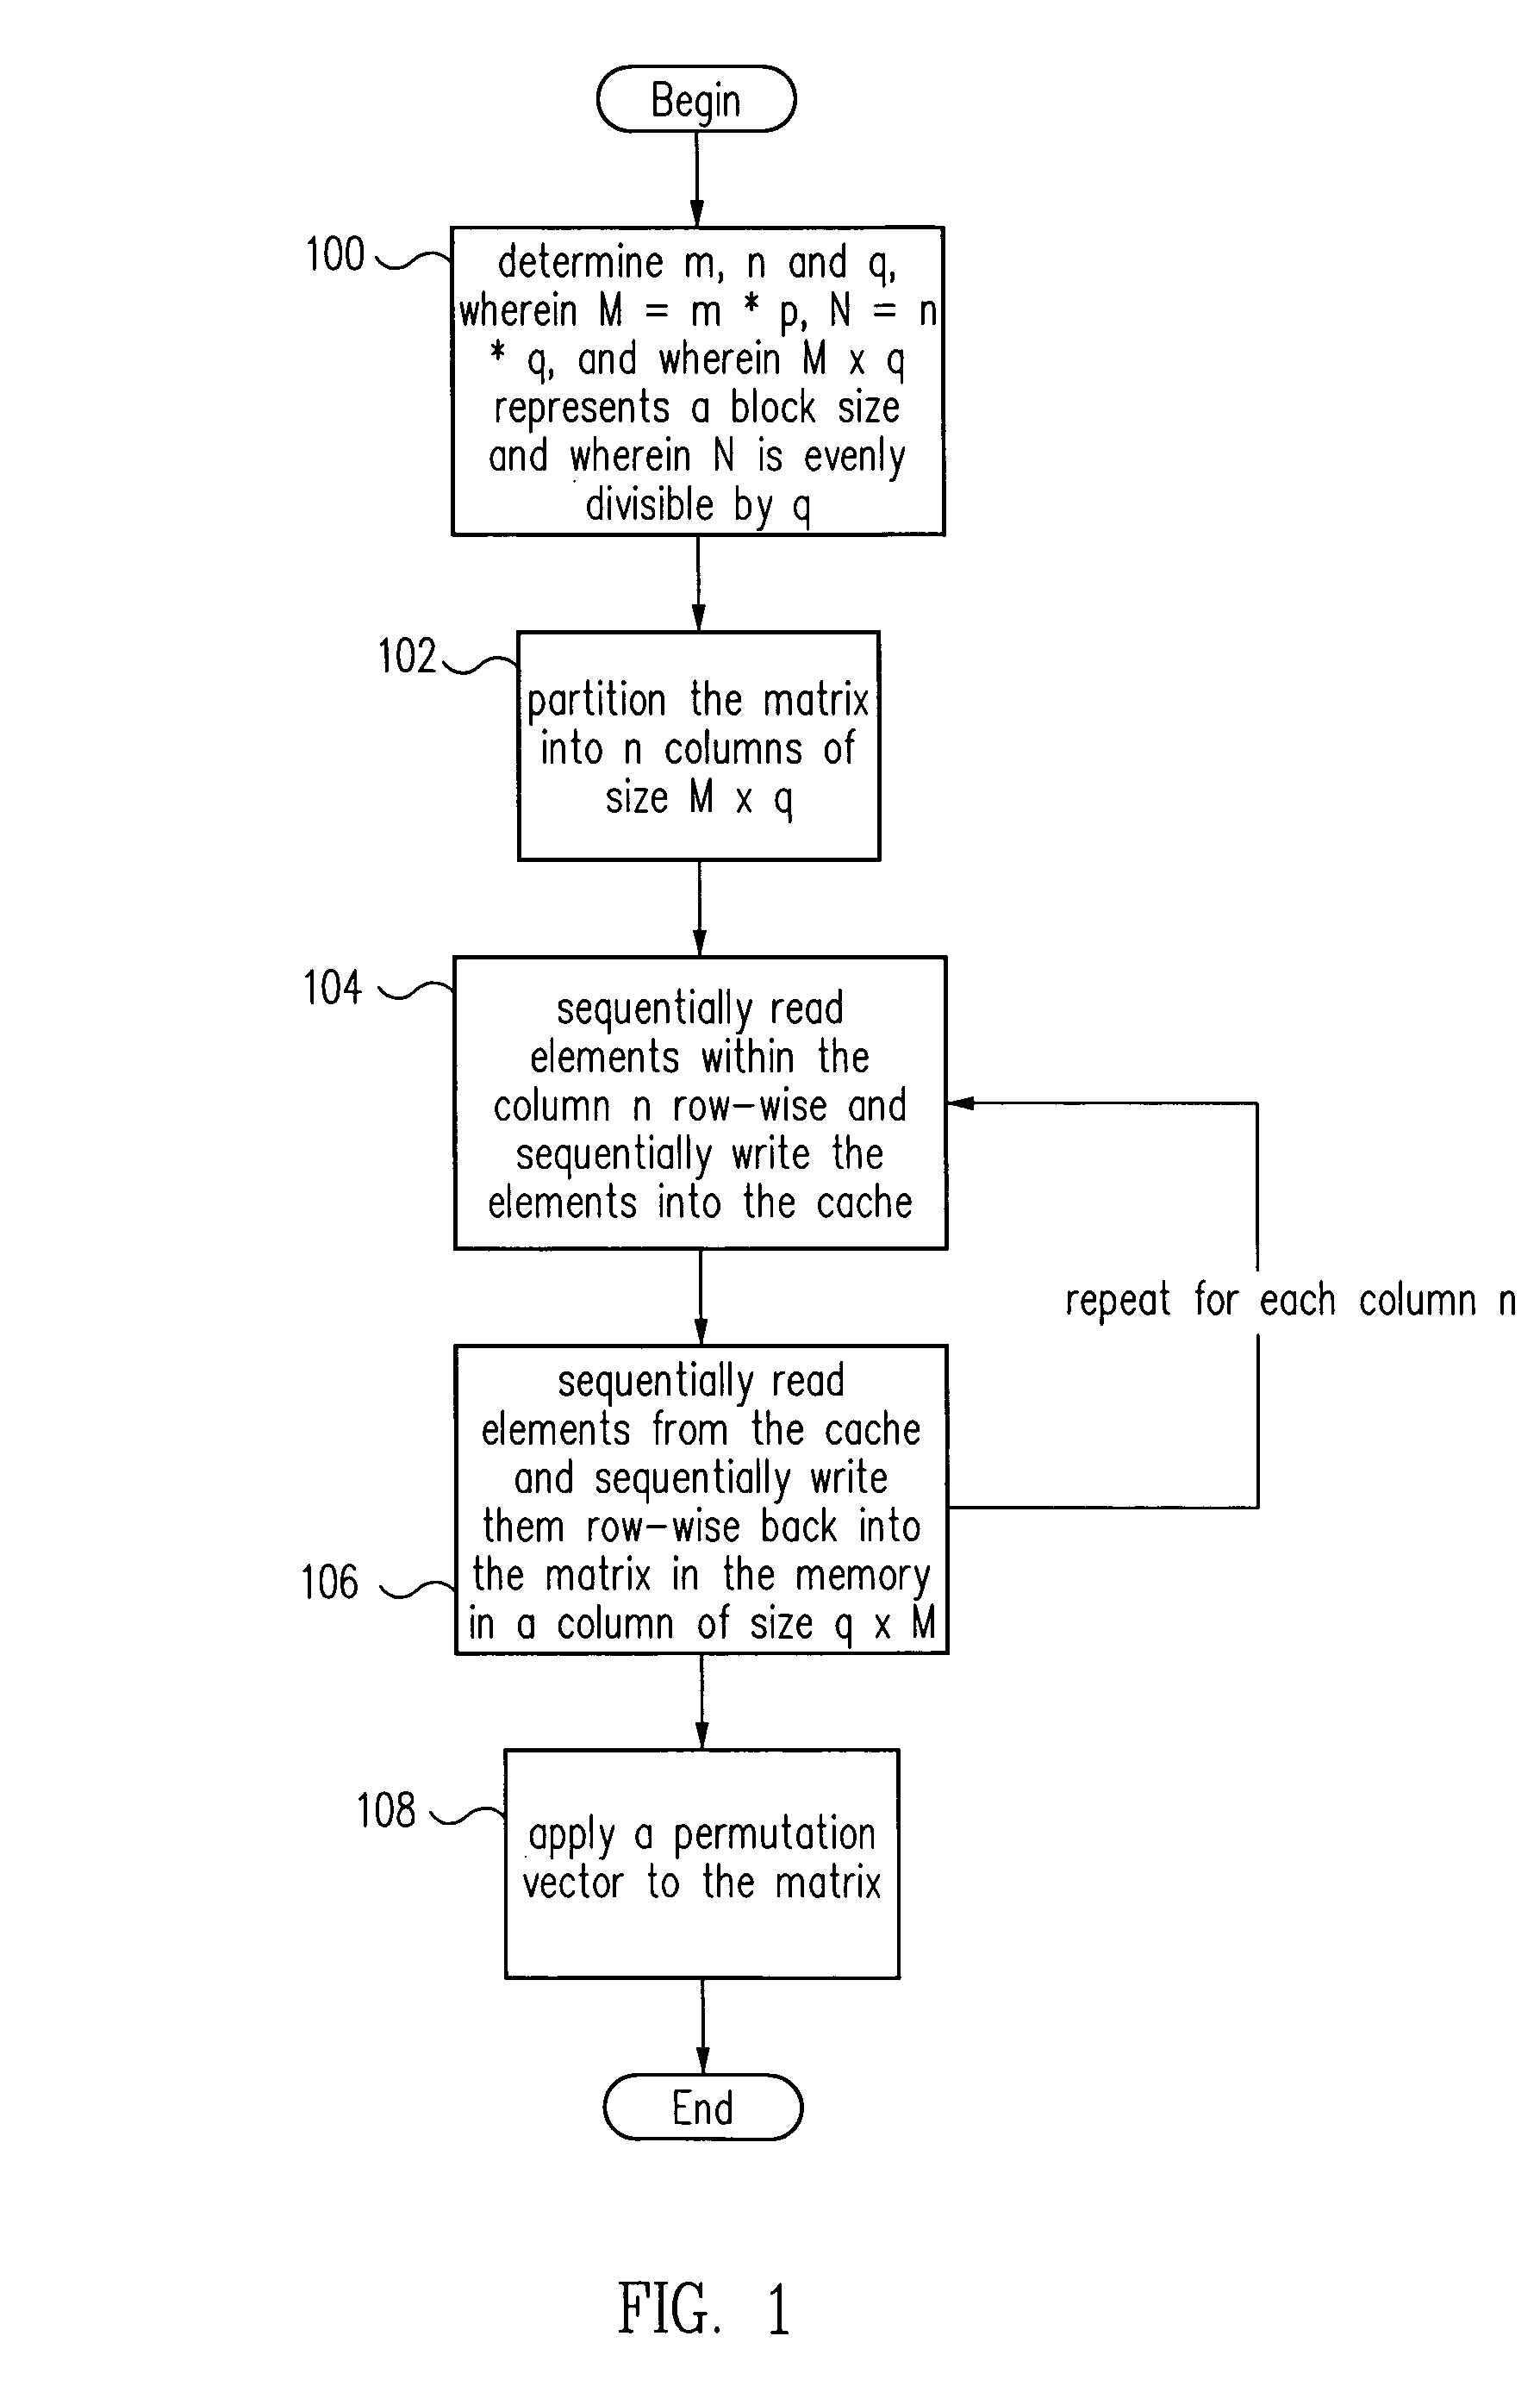 Matrix transposition in a computer system